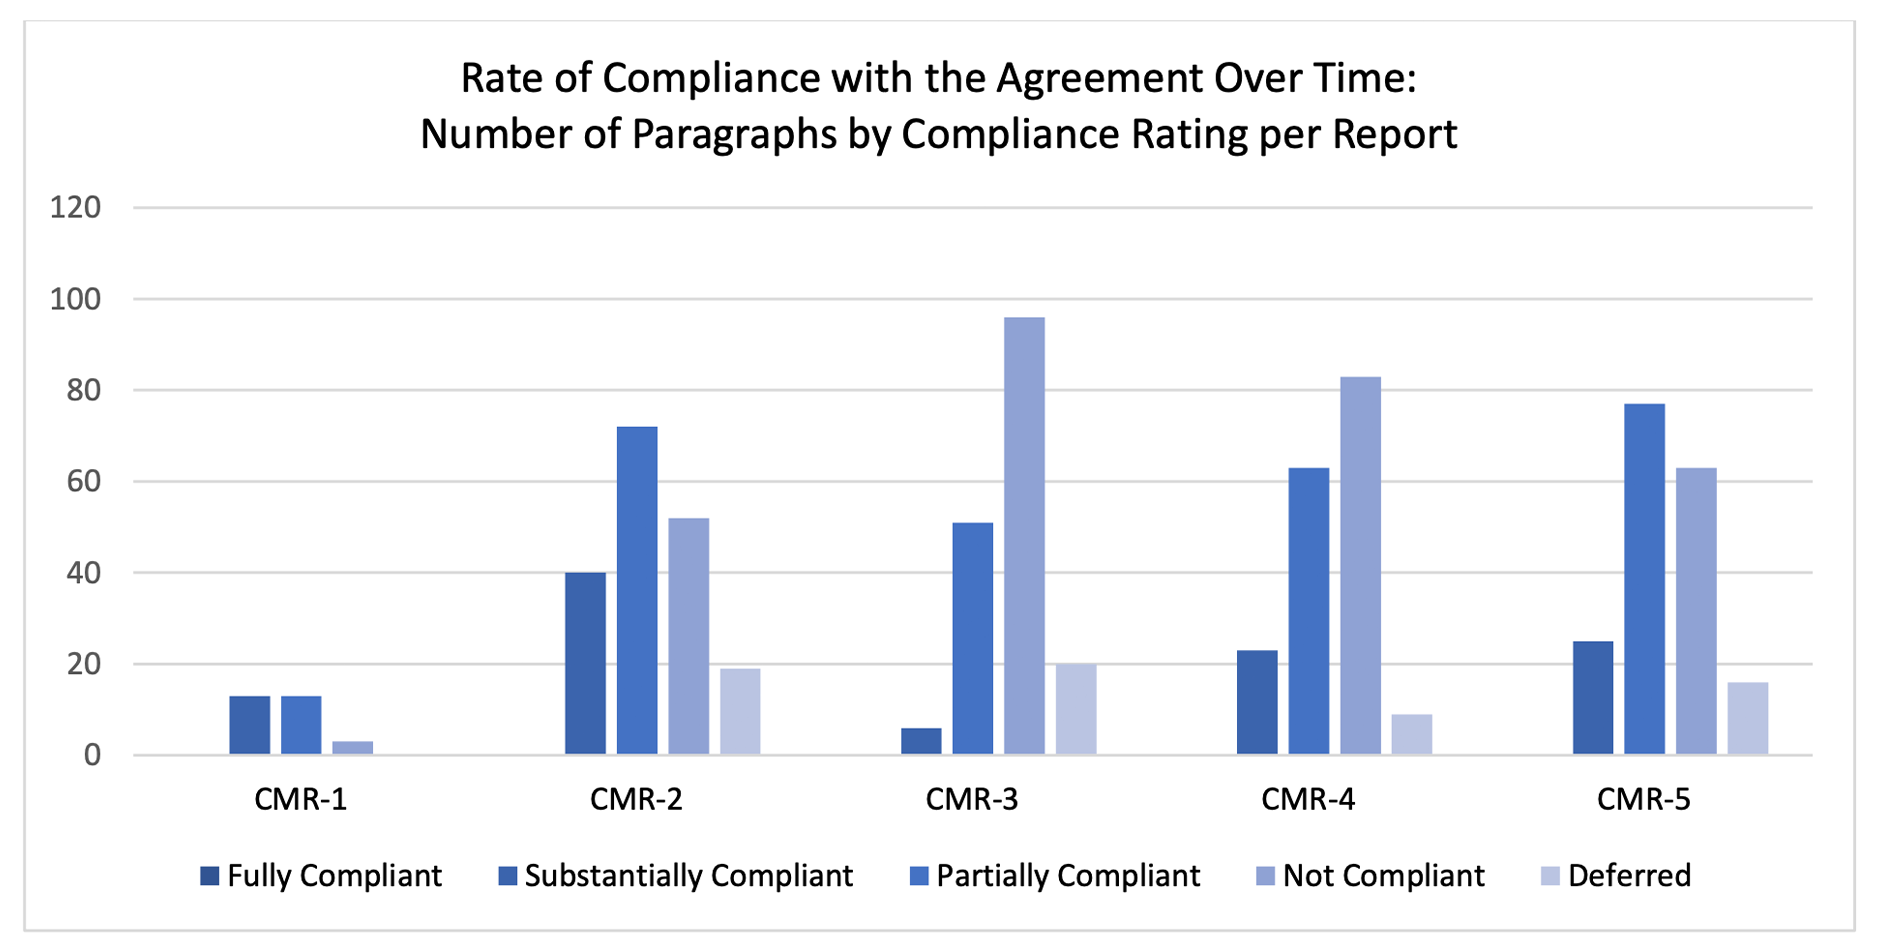 Figure 1. Rate of Compliance Over Time